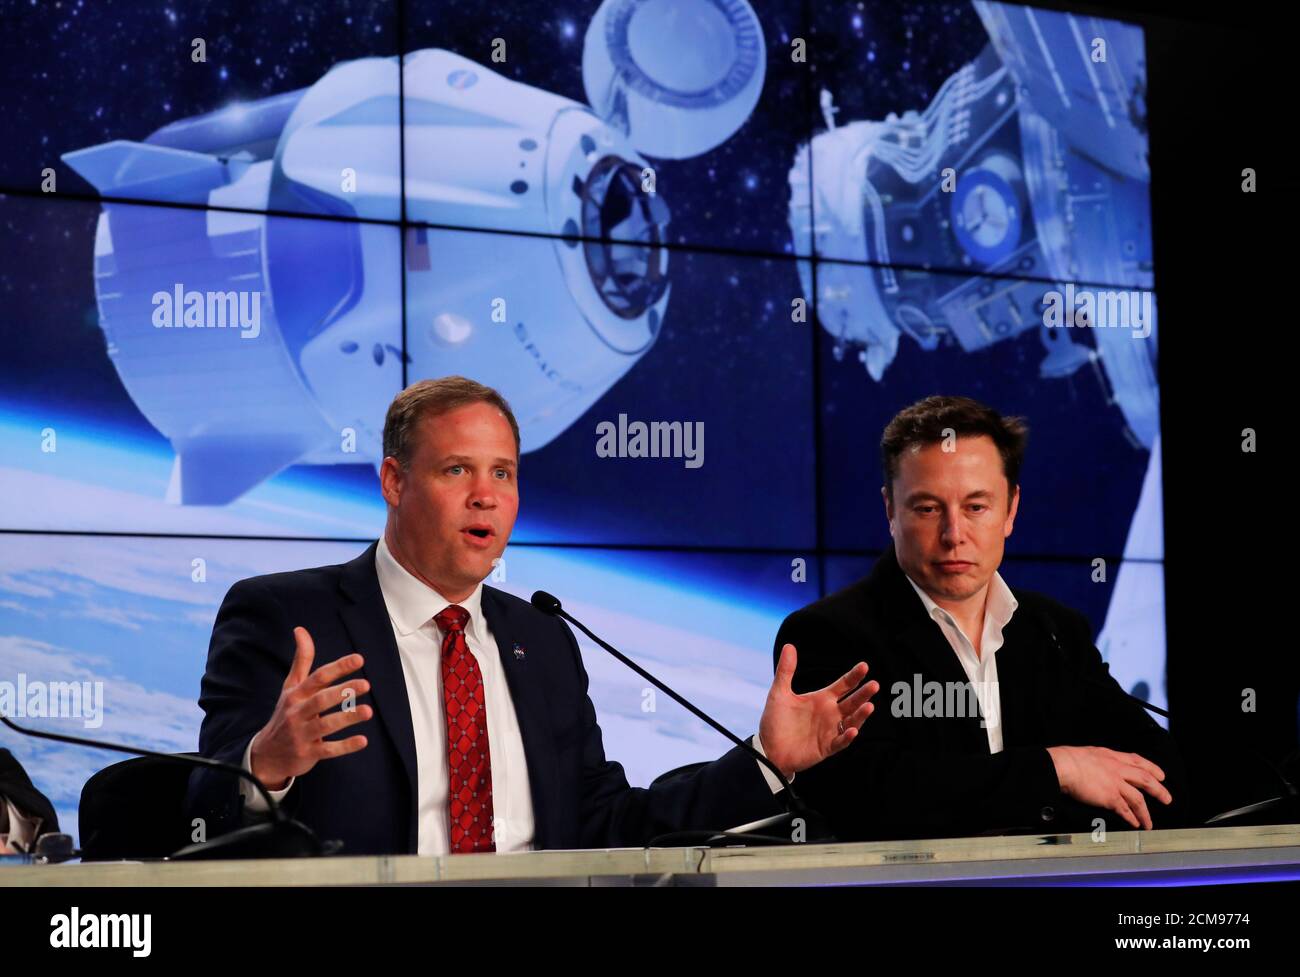 SpaceX founder Elon Musk listens to NASA Administrator Jim Bridenstine at a post-launch news conference after a SpaceX Falcon 9 rocket, carrying the Crew Dragon spacecraft, lifted off on an uncrewed test flight to the International Space Station from the Kennedy Space Center in Cape Canaveral, Florida, U.S., March 2, 2019. REUTERS/Mike Blake Stock Photo